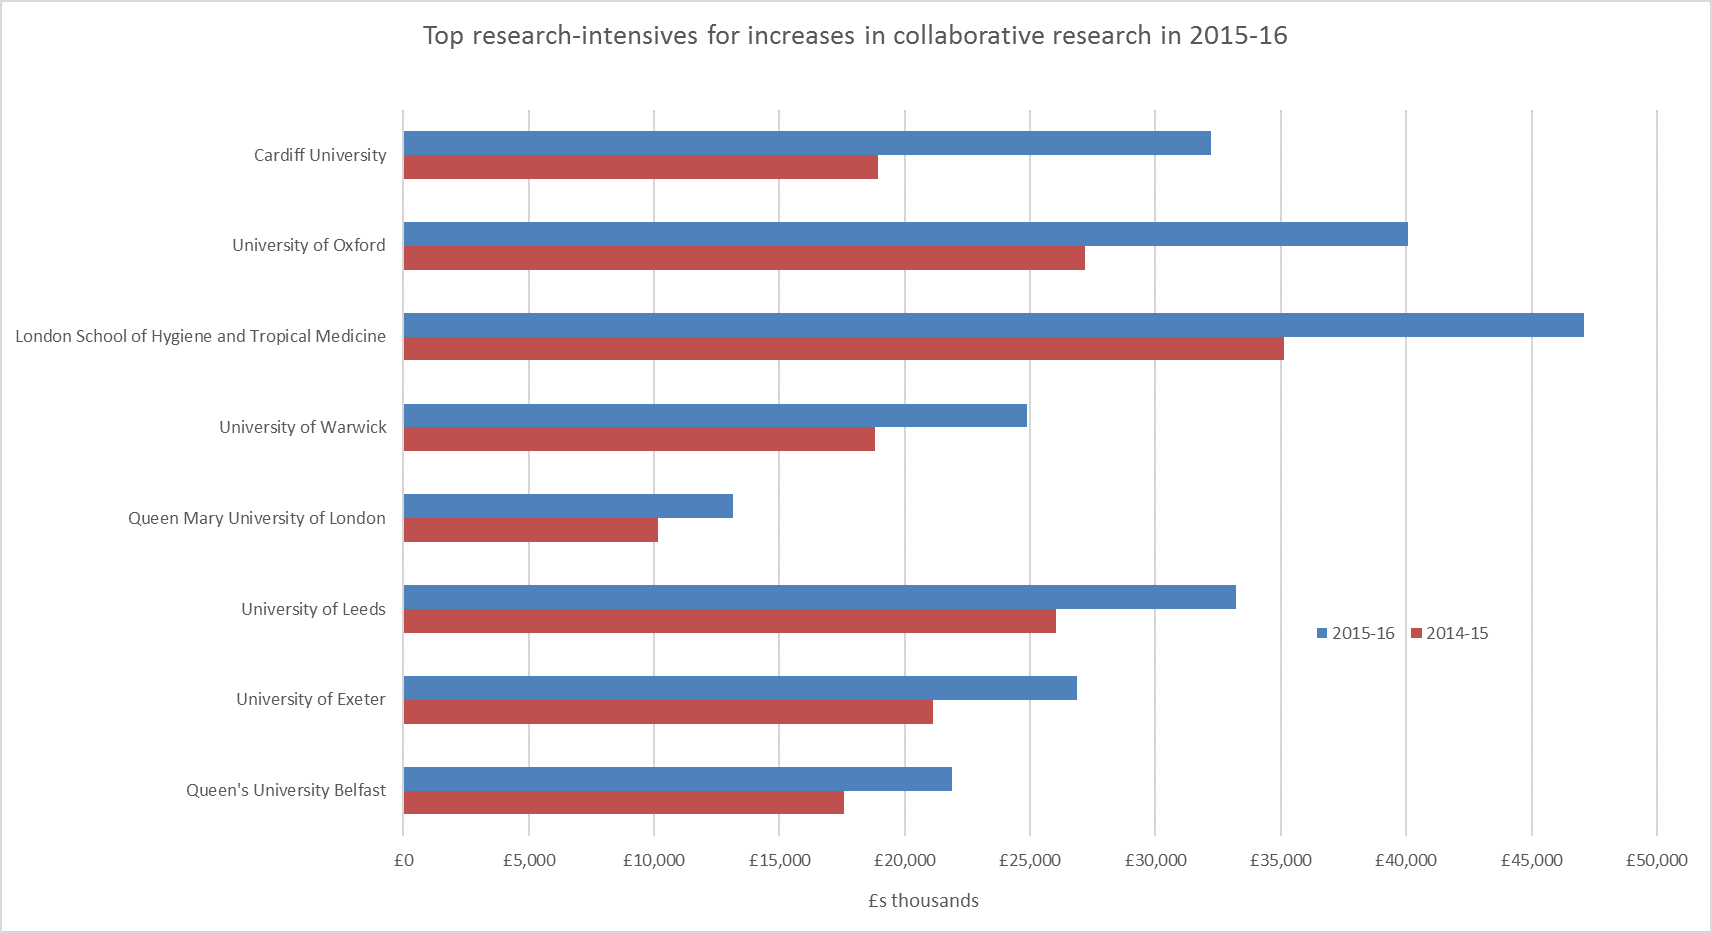 Top research-intensives for increases in collaborative research in 2015-16